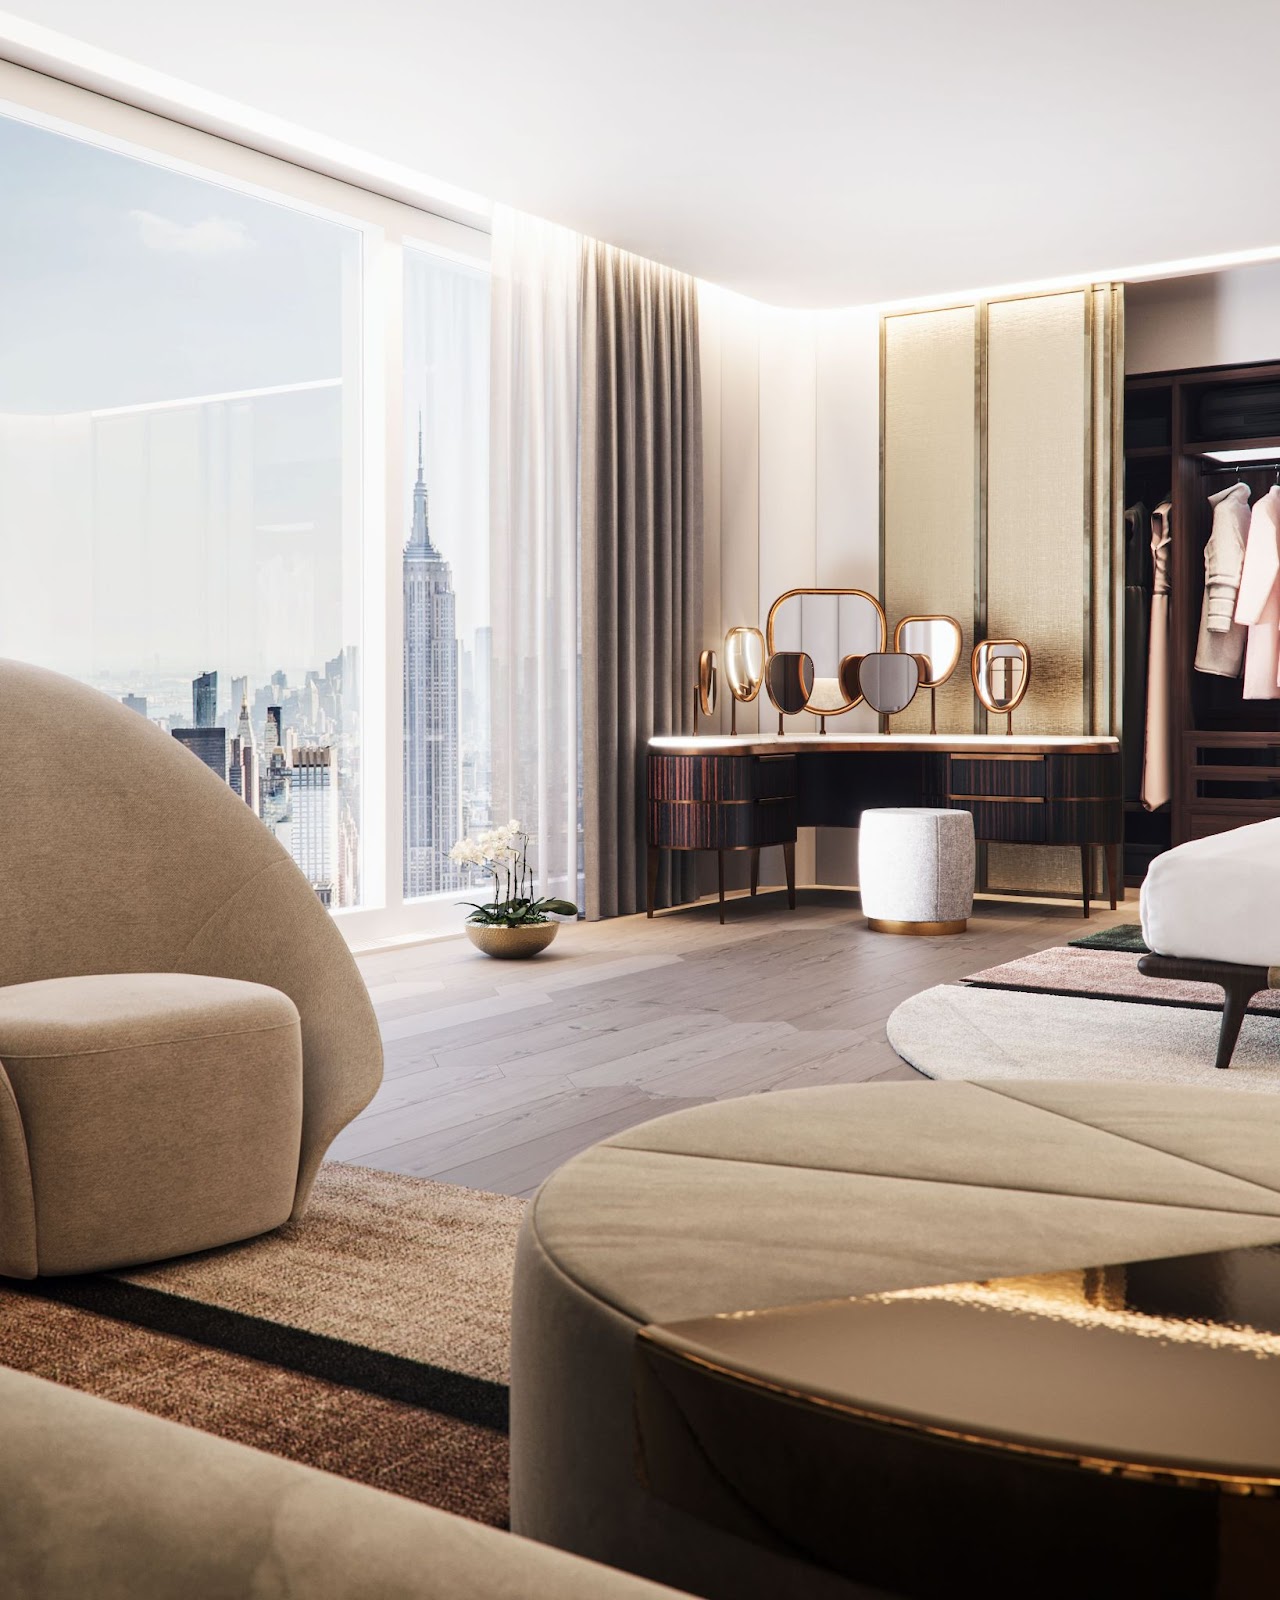 New York is the location of the hotel suite designed by Camilla Bellini for Flou